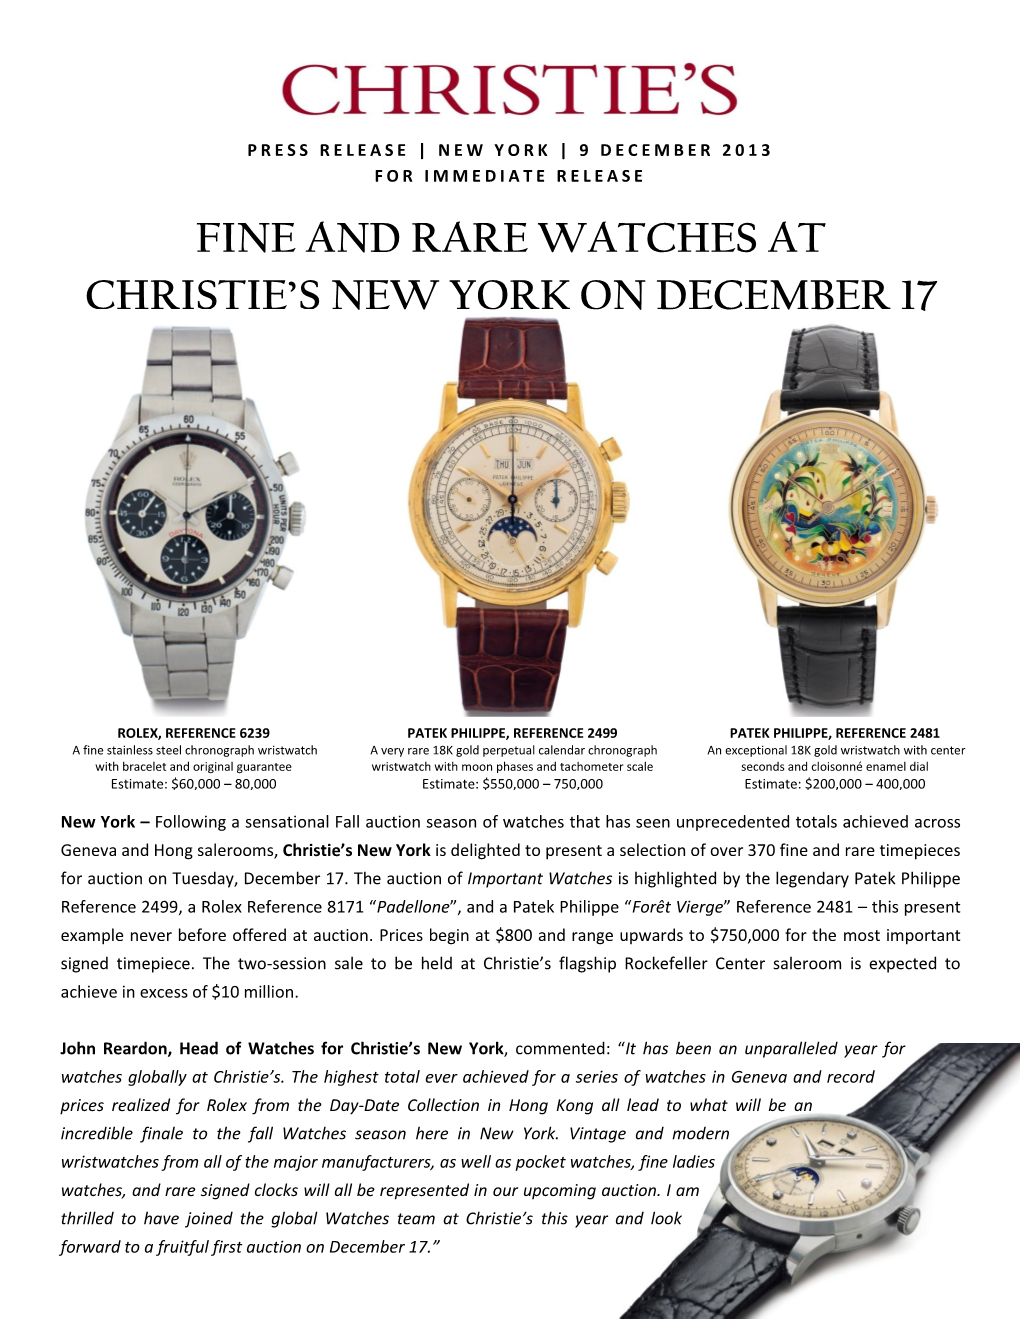 Fine and Rare Watches at Christie's New York On